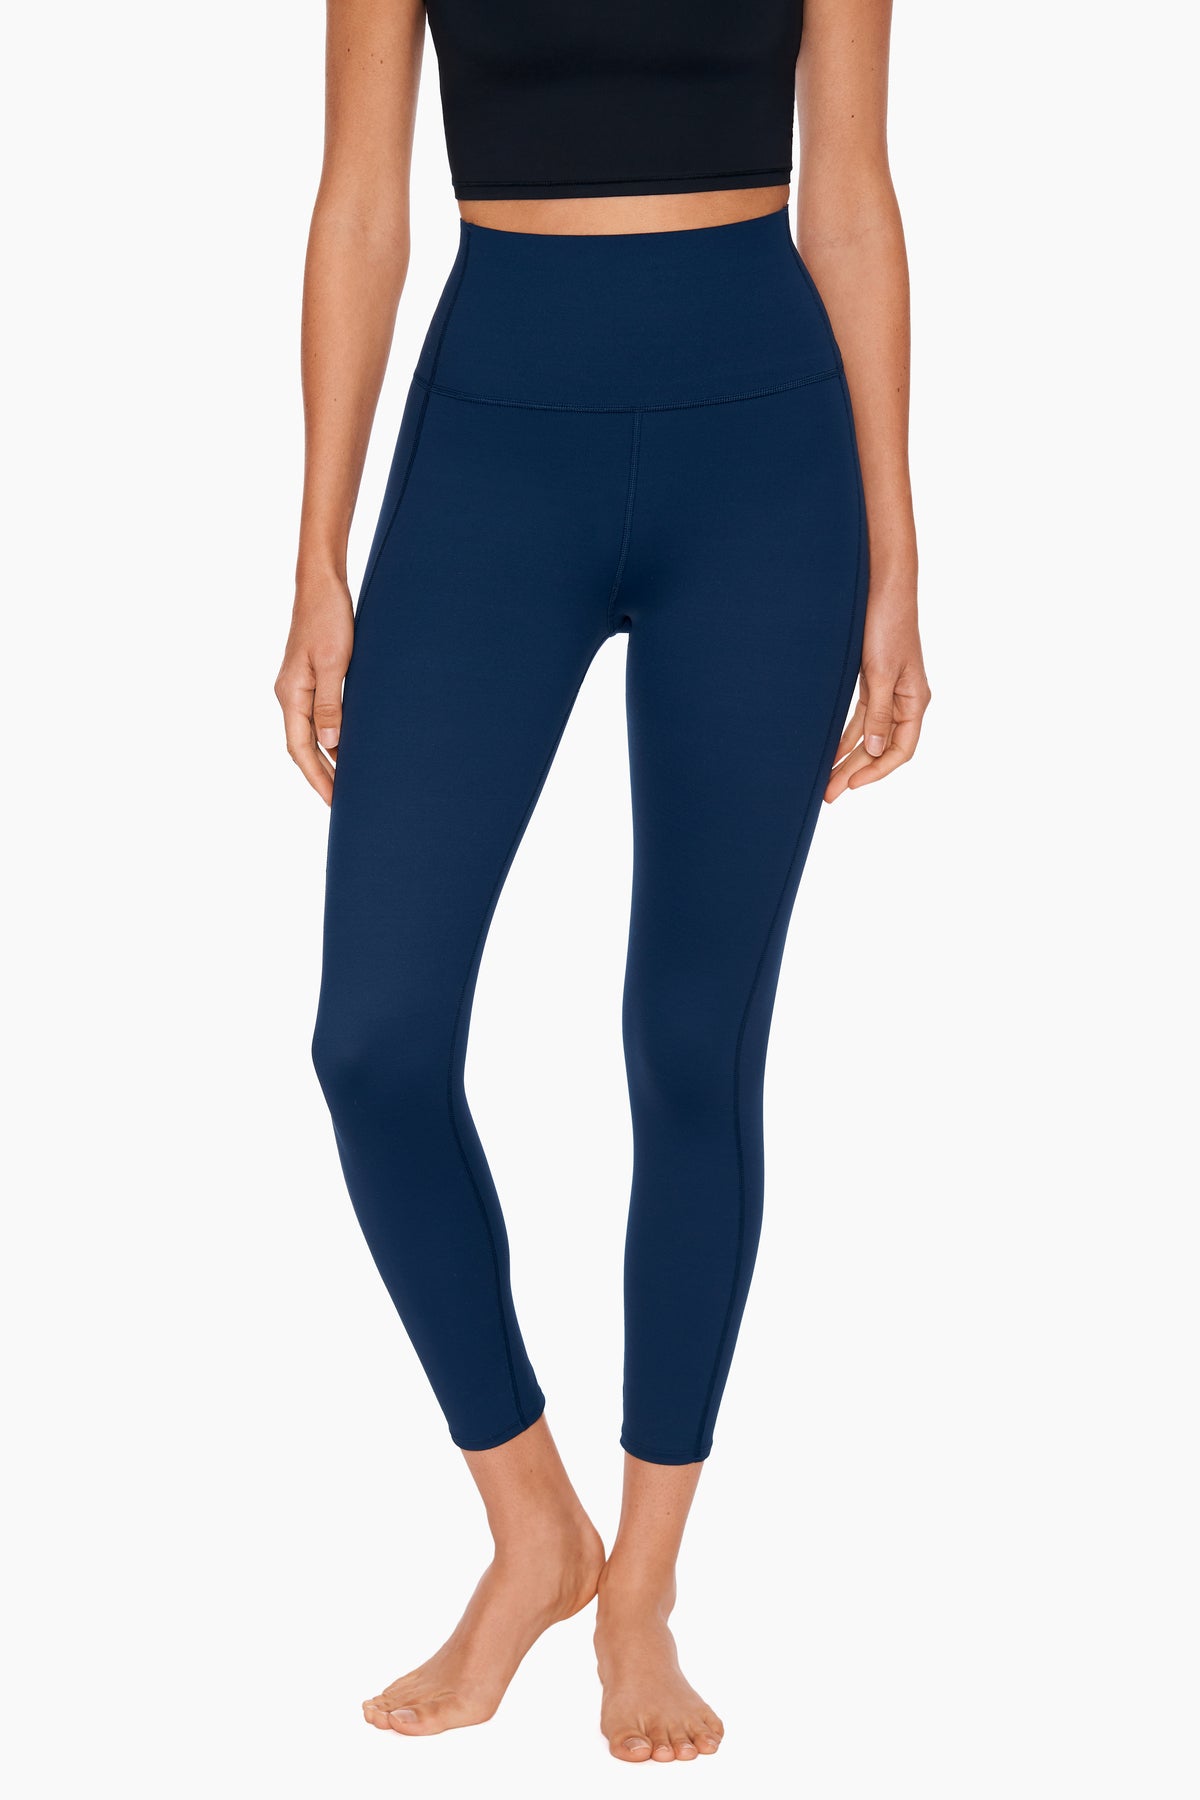 Soft Leggings For Women - High Waisted Tummy Control No See Through Workout  Yoga Pants for Sale Australia, New Collection Online